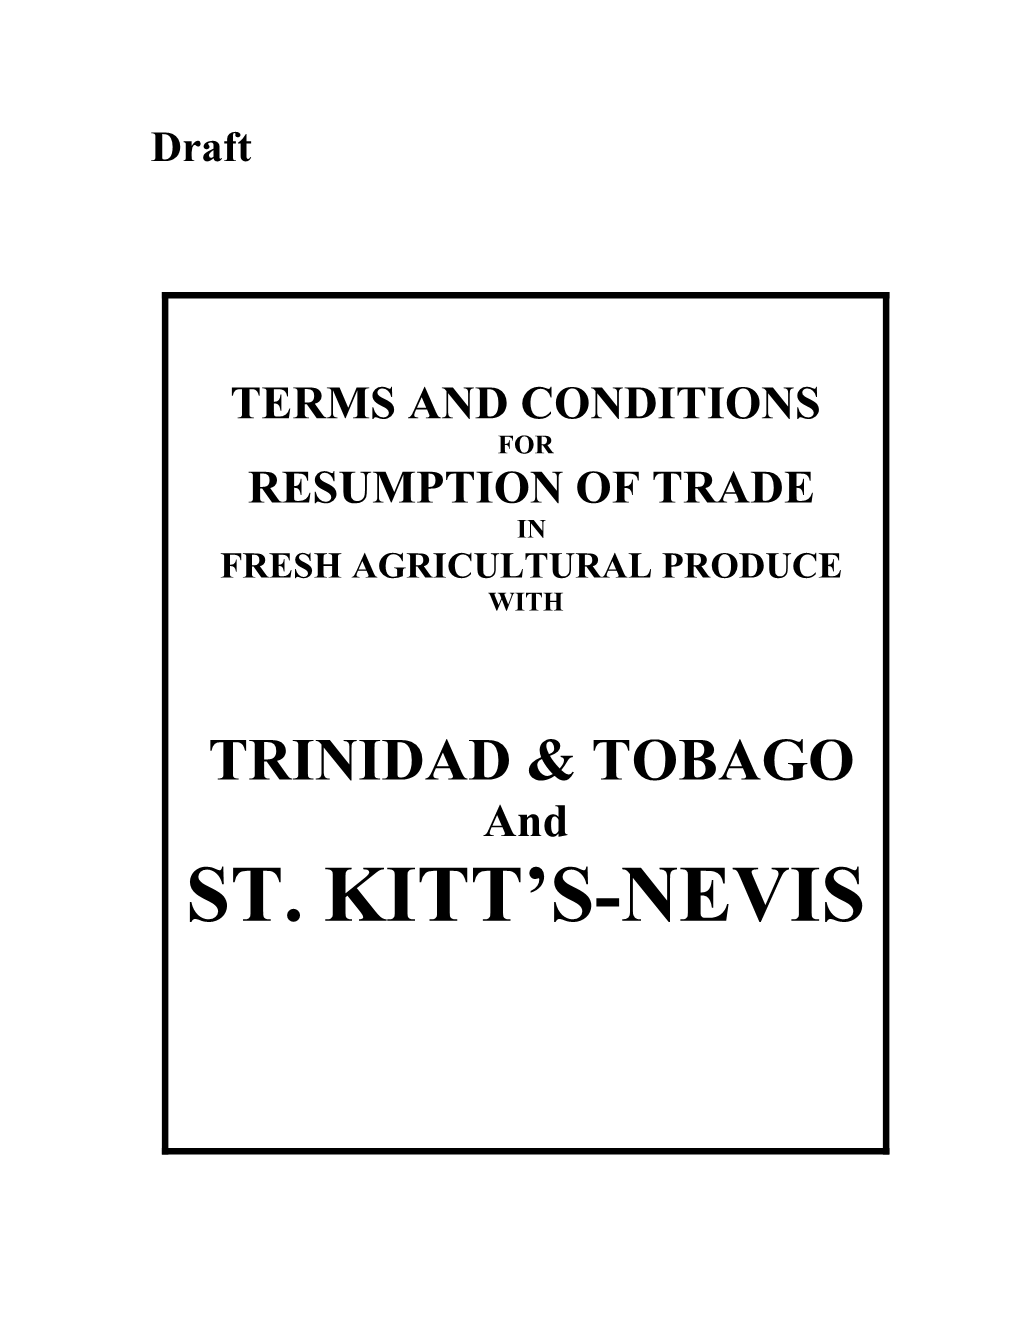 Terms and Conditions for the Resumption of Trade in Fresh Agricultural Produce from Trinidad